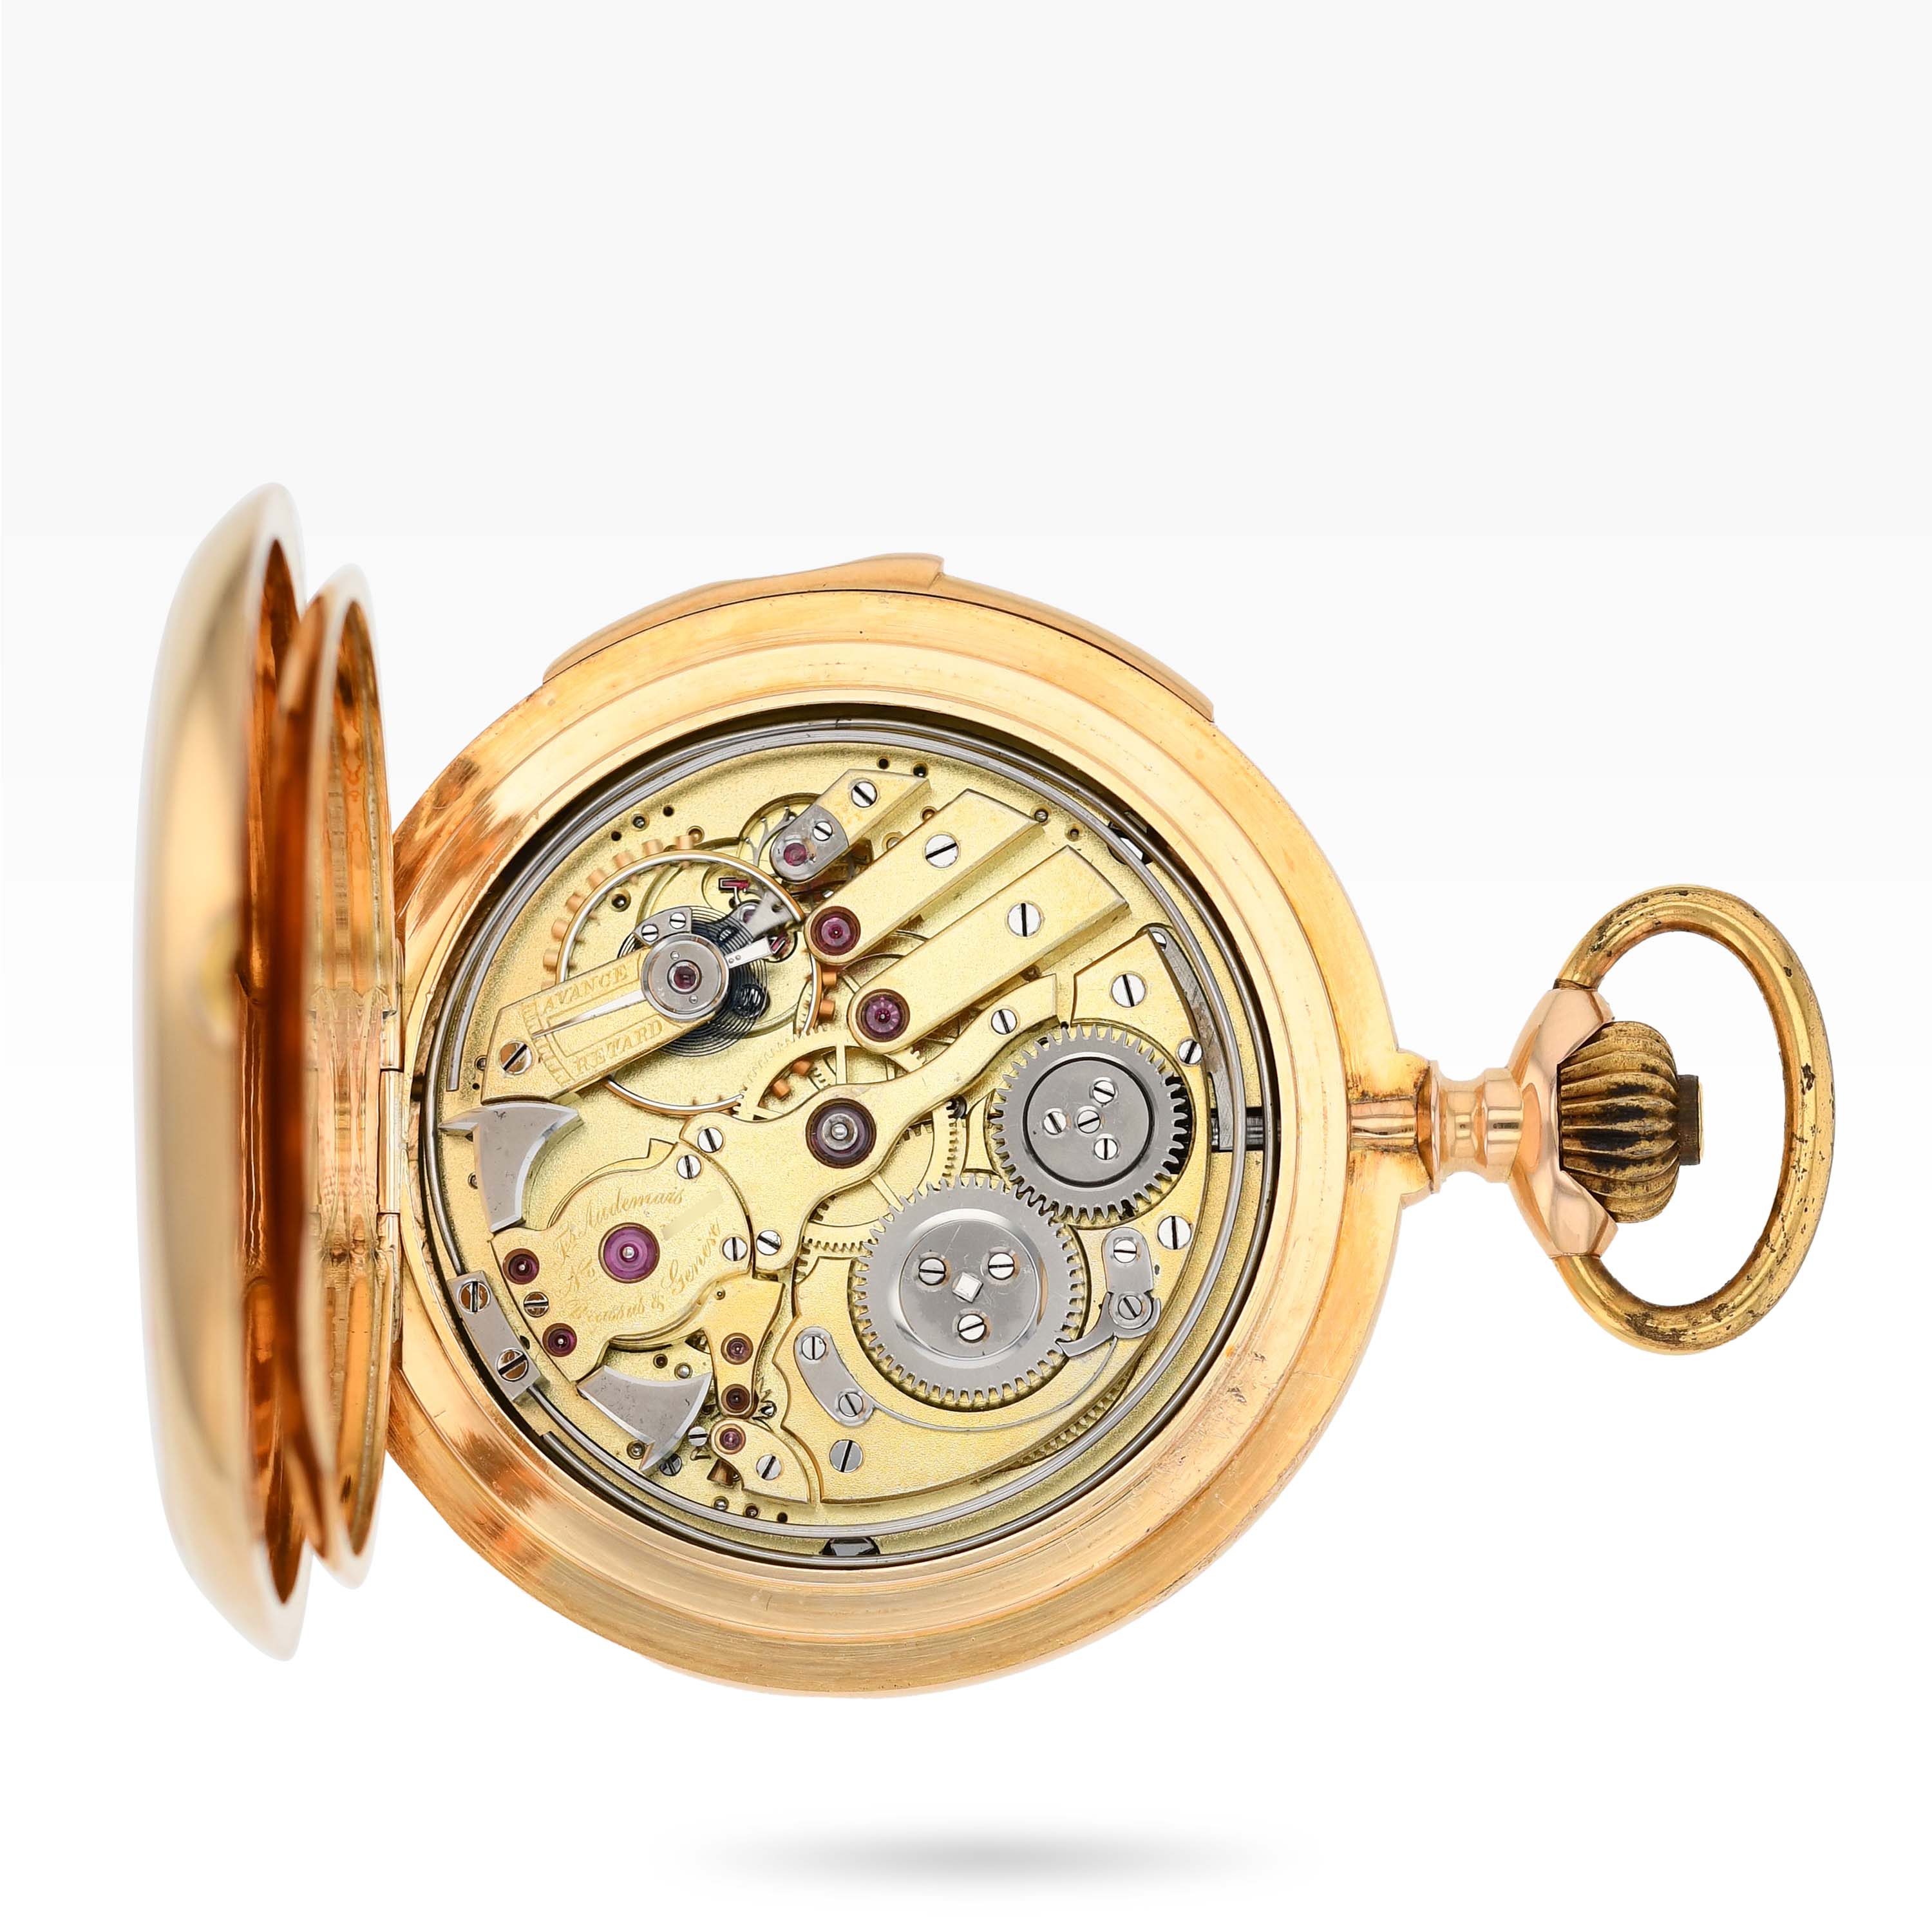 1278PW1 Frères Audemars 18k yellow gold hunting case minute repeater pocket watch img-main4